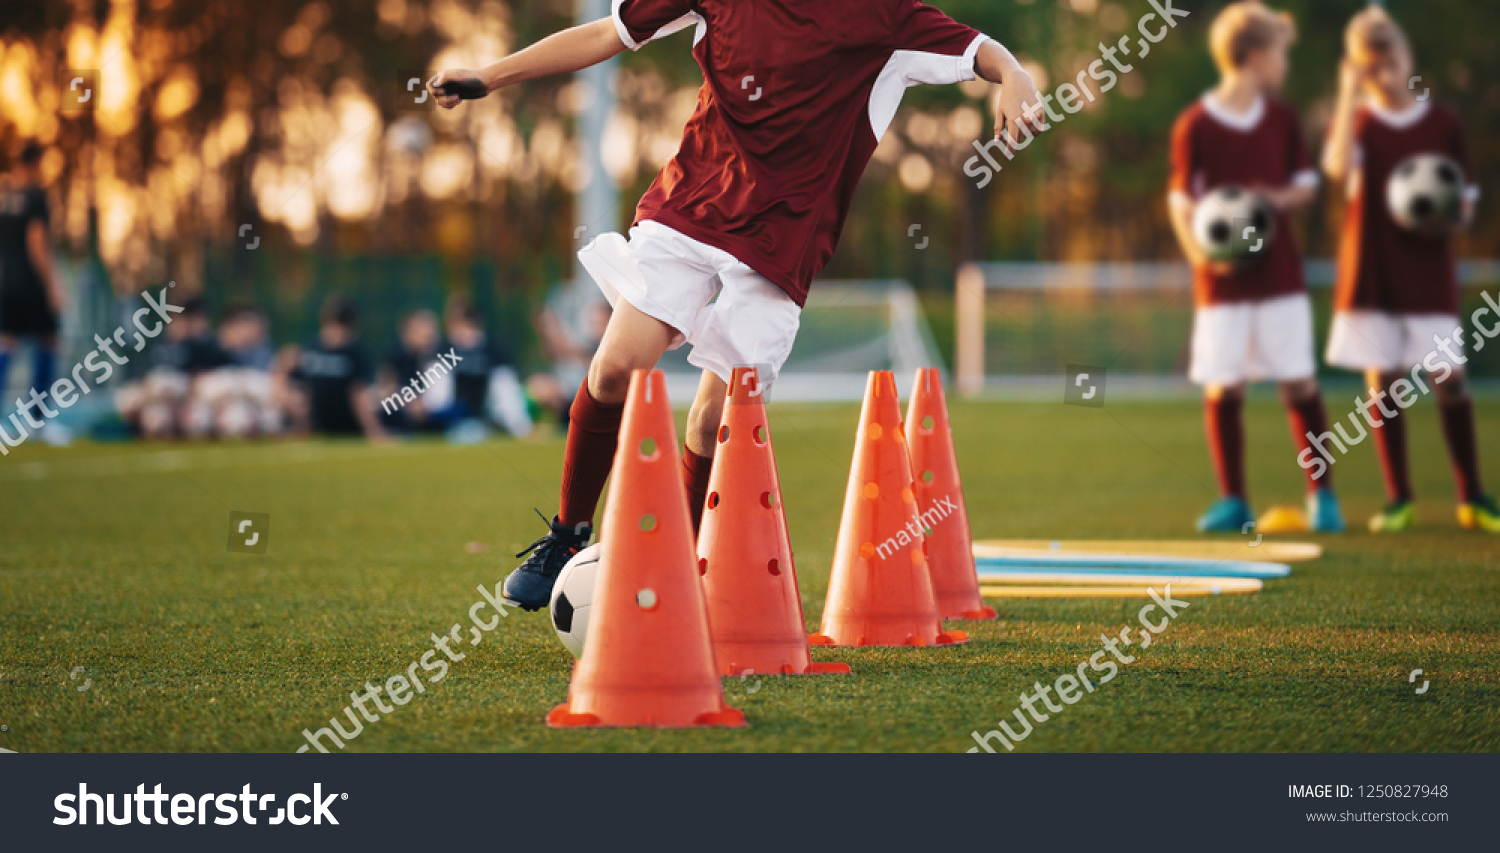 Football Drills: The Slalom Drill. Youth soccer practice drills. Young football players training on pitch. Soccer slalom cone drill. Boy in red soccer jersey shirt running with ball between cones #1250827948